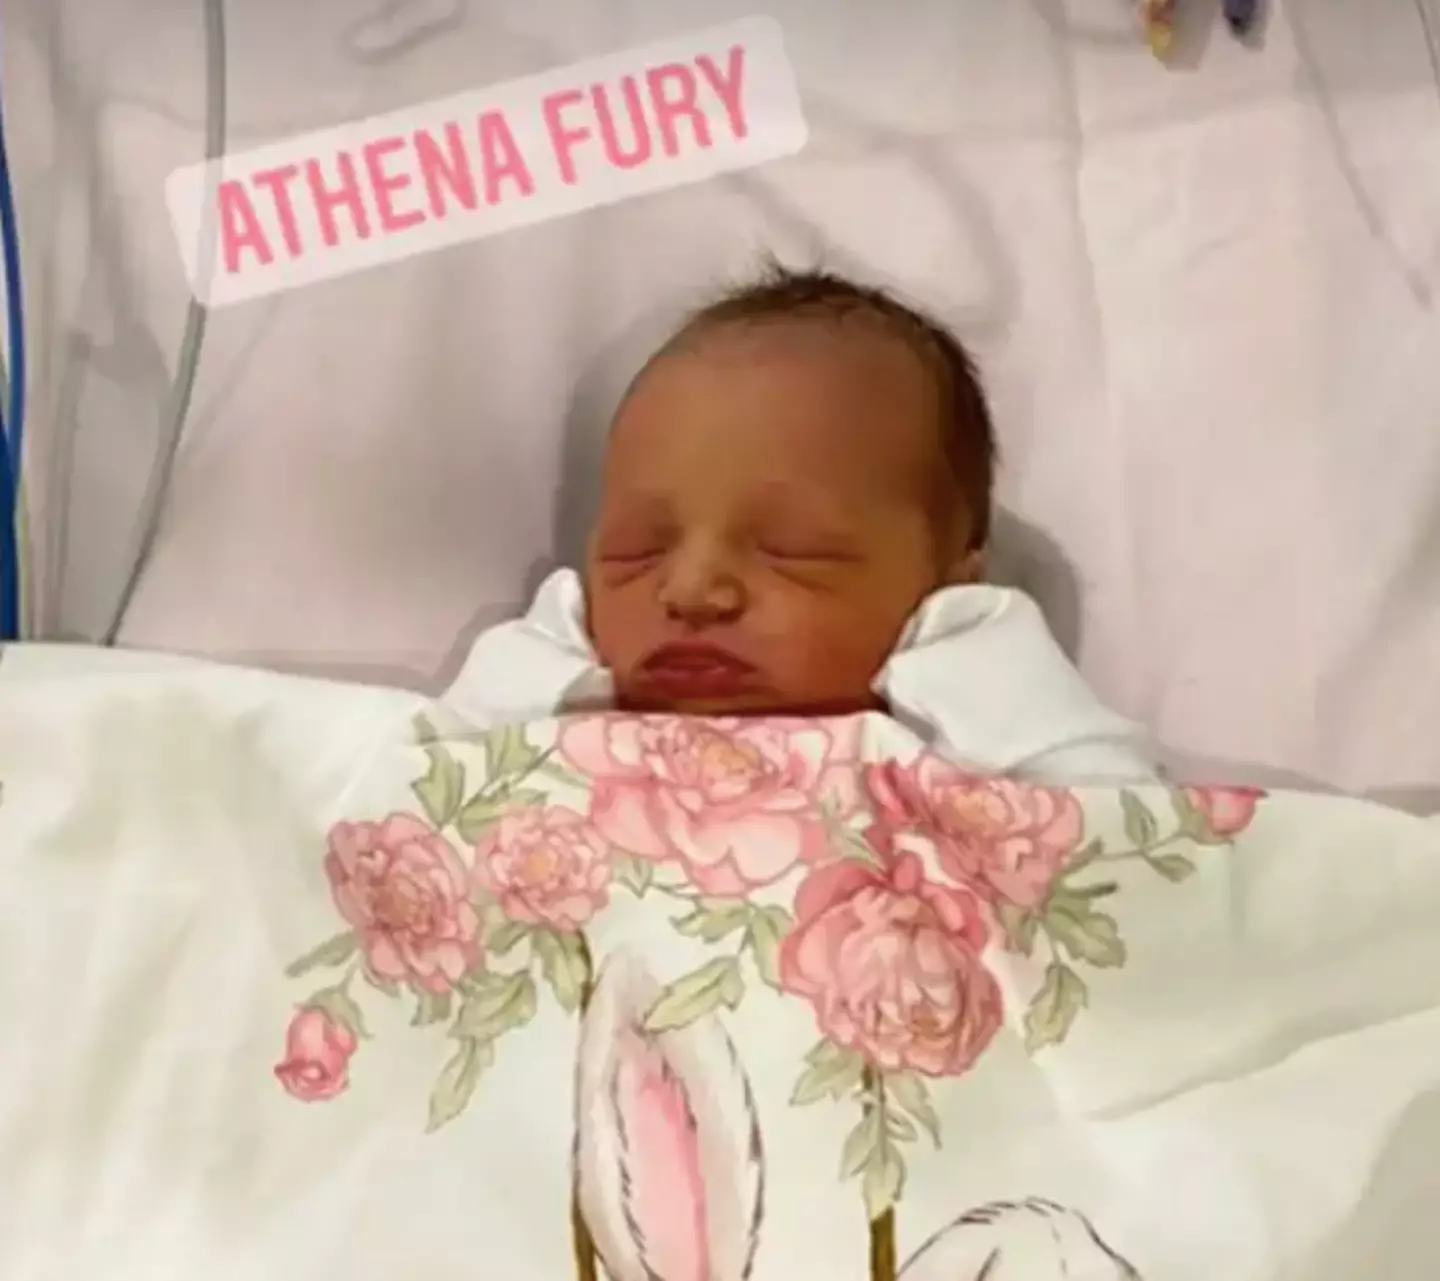 Athena briefly went off the ventilator, but is now back in ICU (